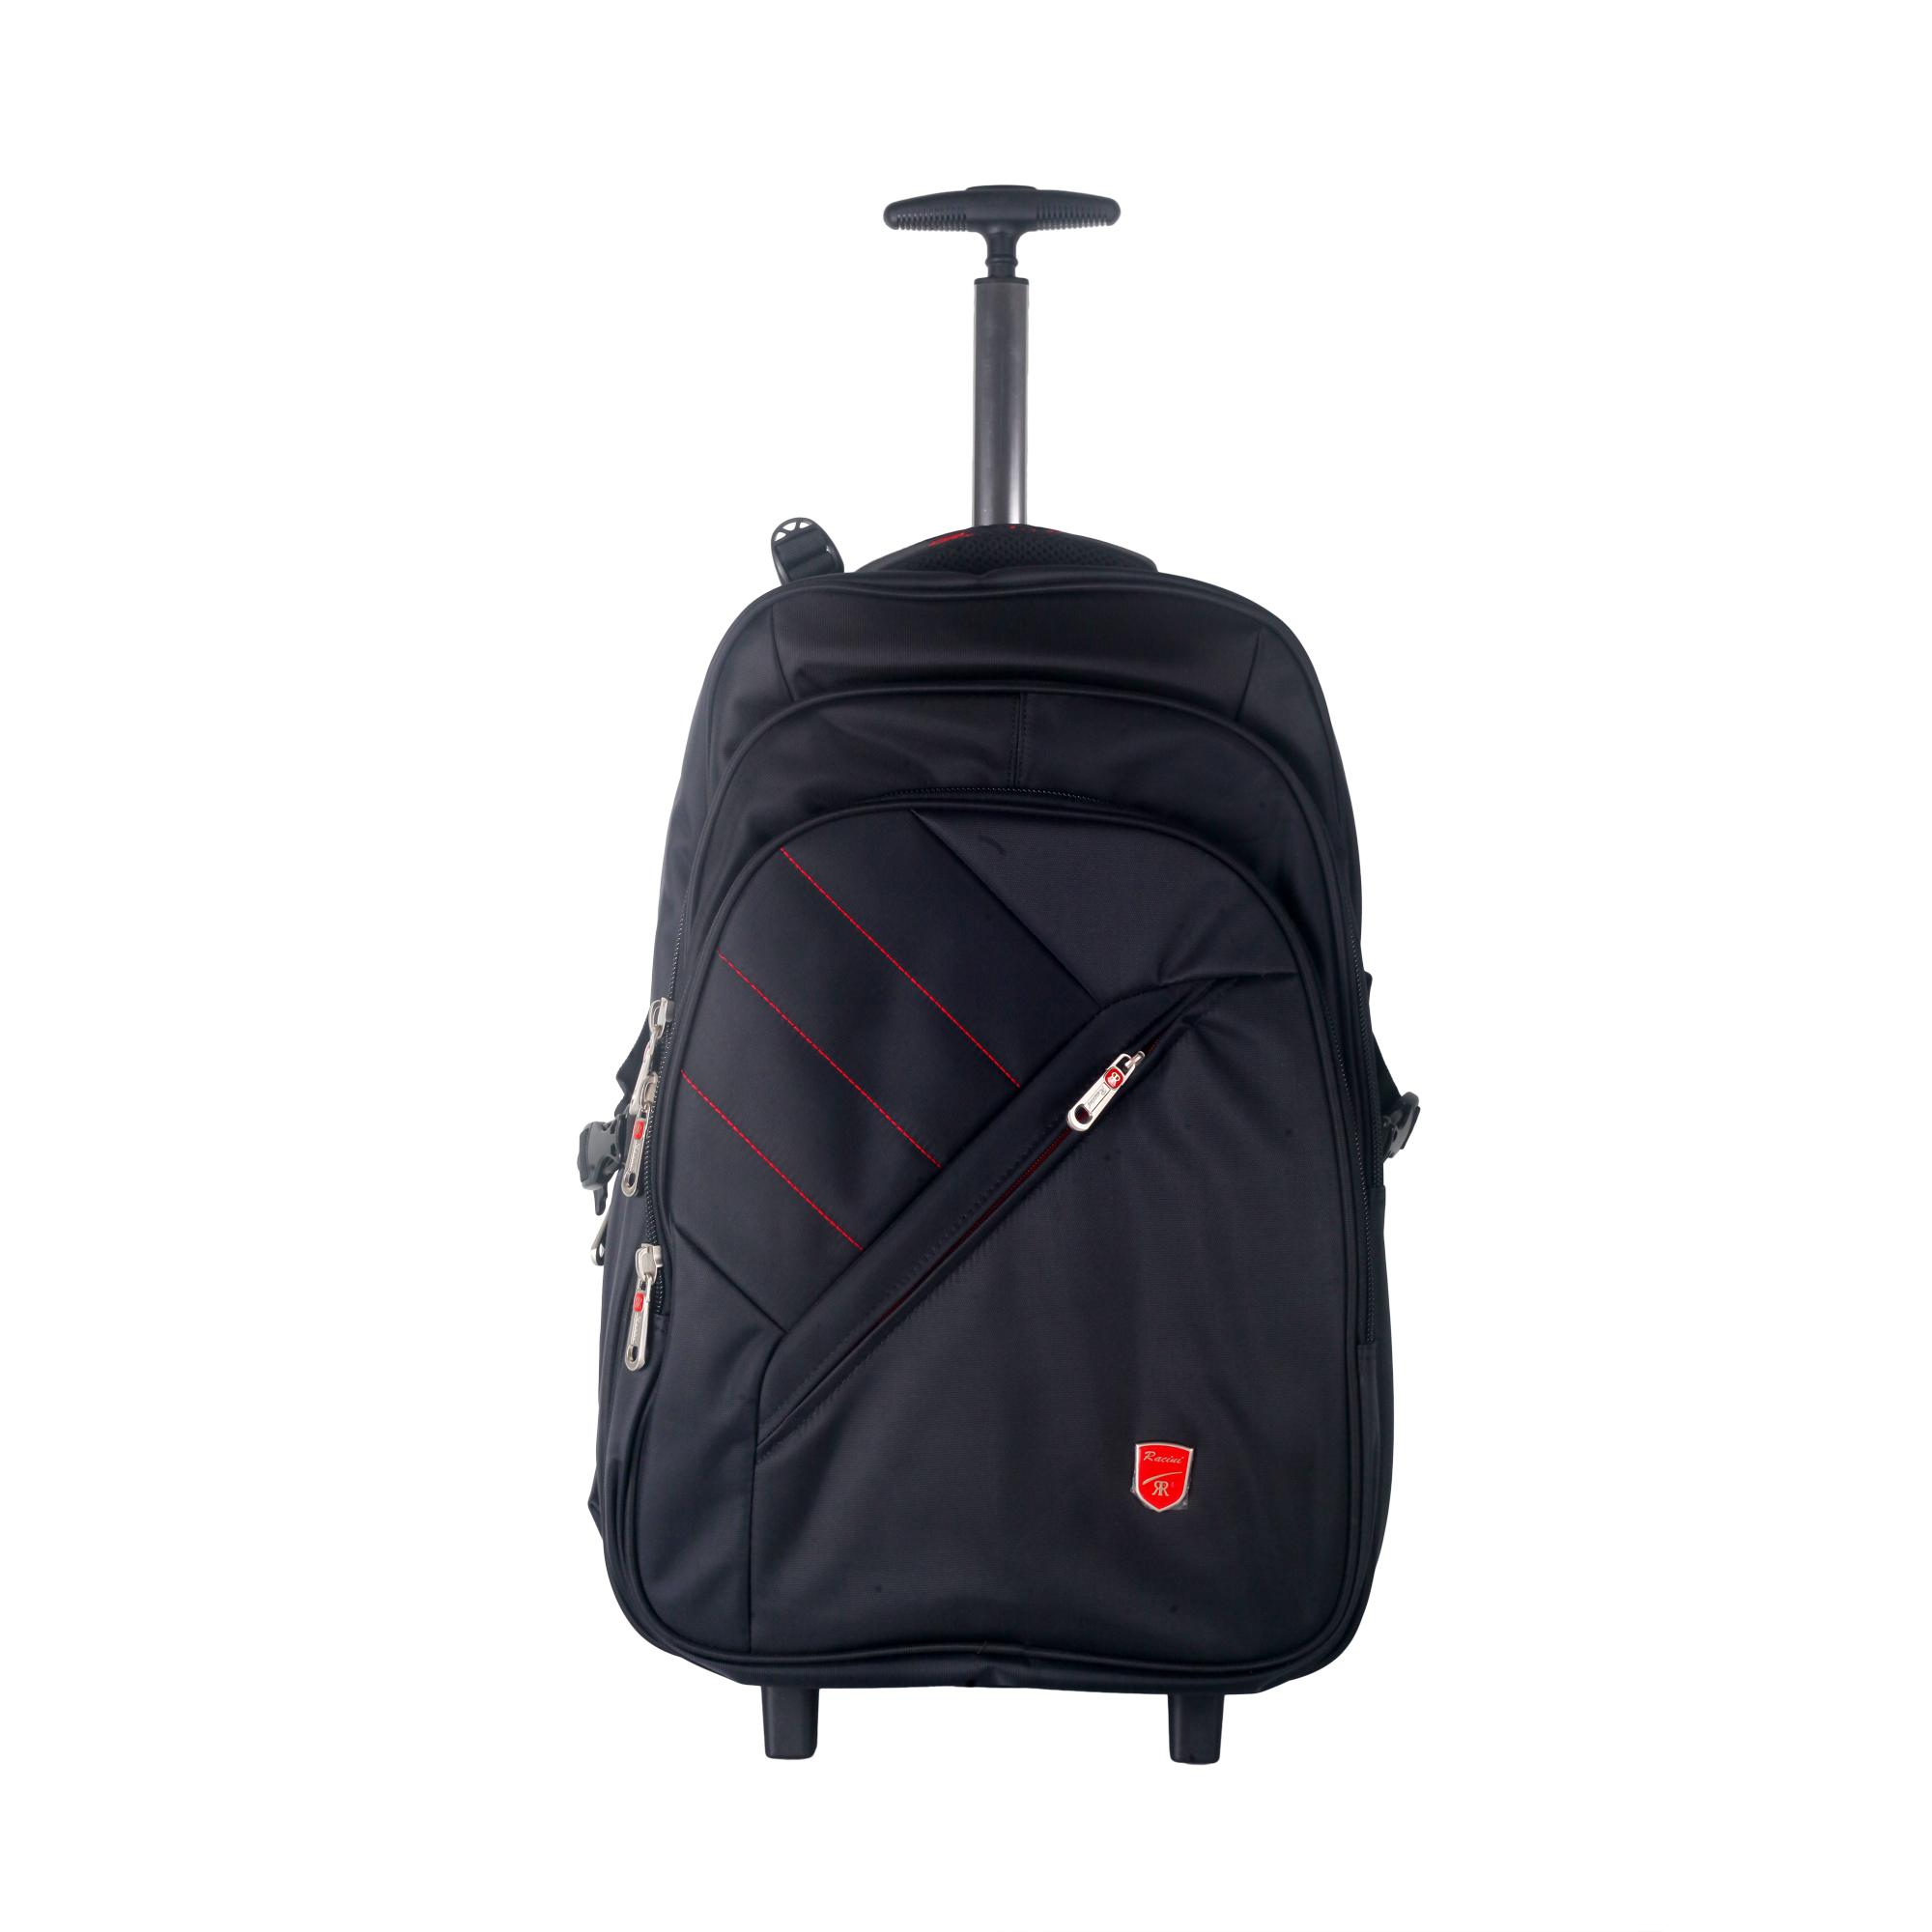 Luggage for sale - Luggage Bag online brands, prices & reviews in Philippines | 0